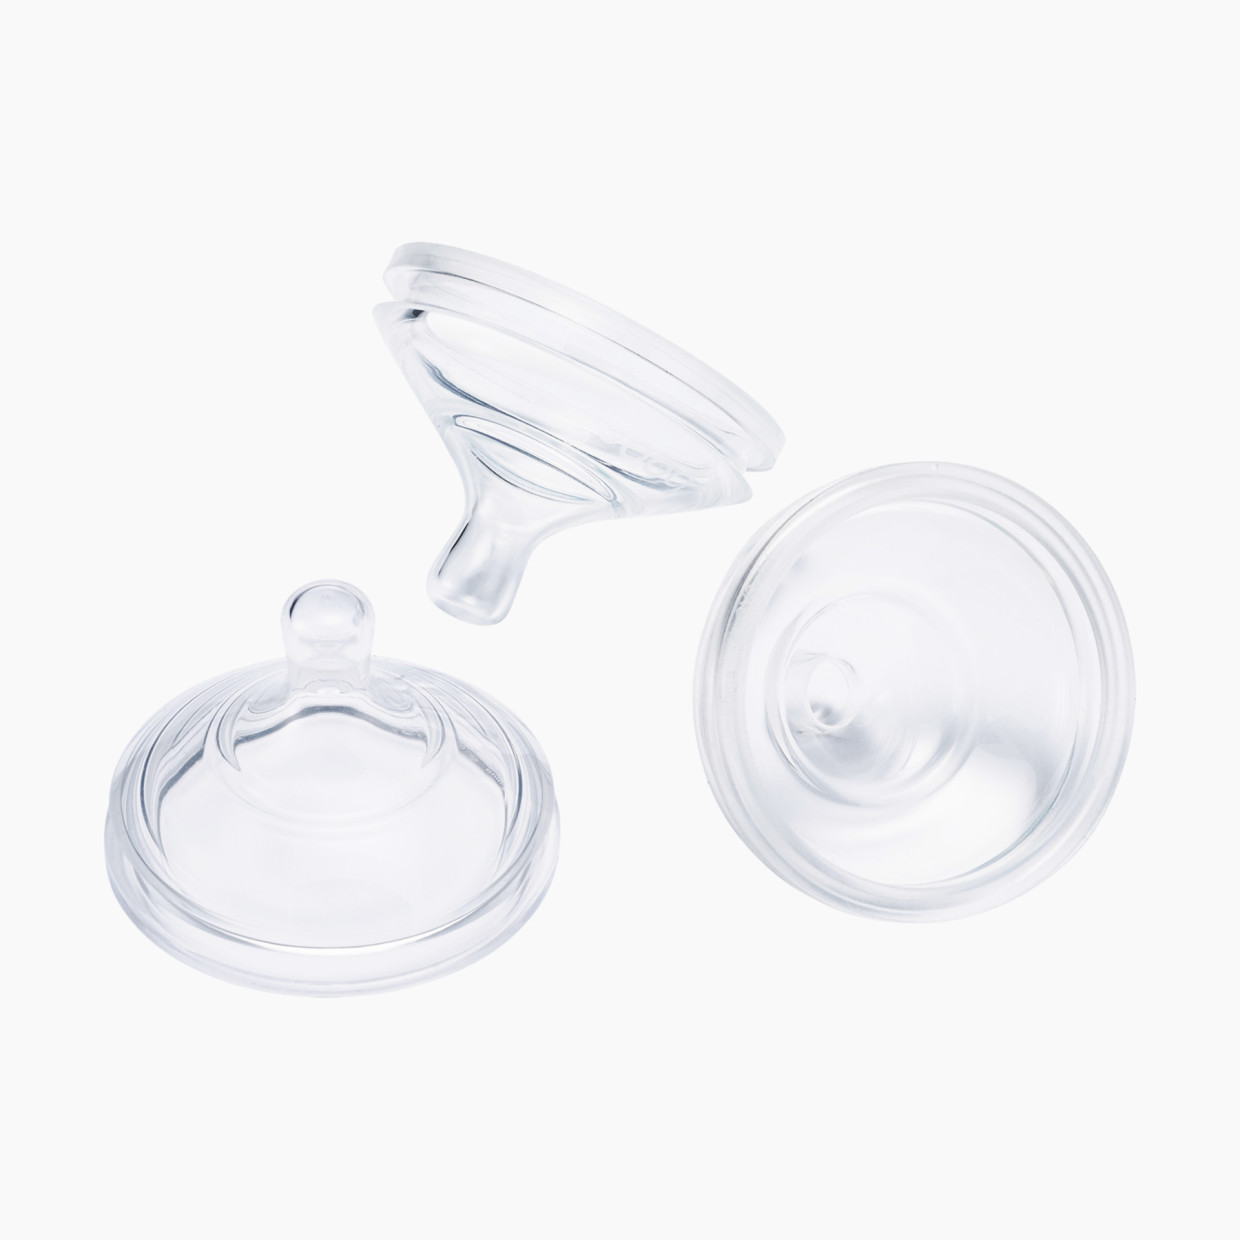 Boon Nursh Silicone Nipples (3 Pack) - Stage 1.